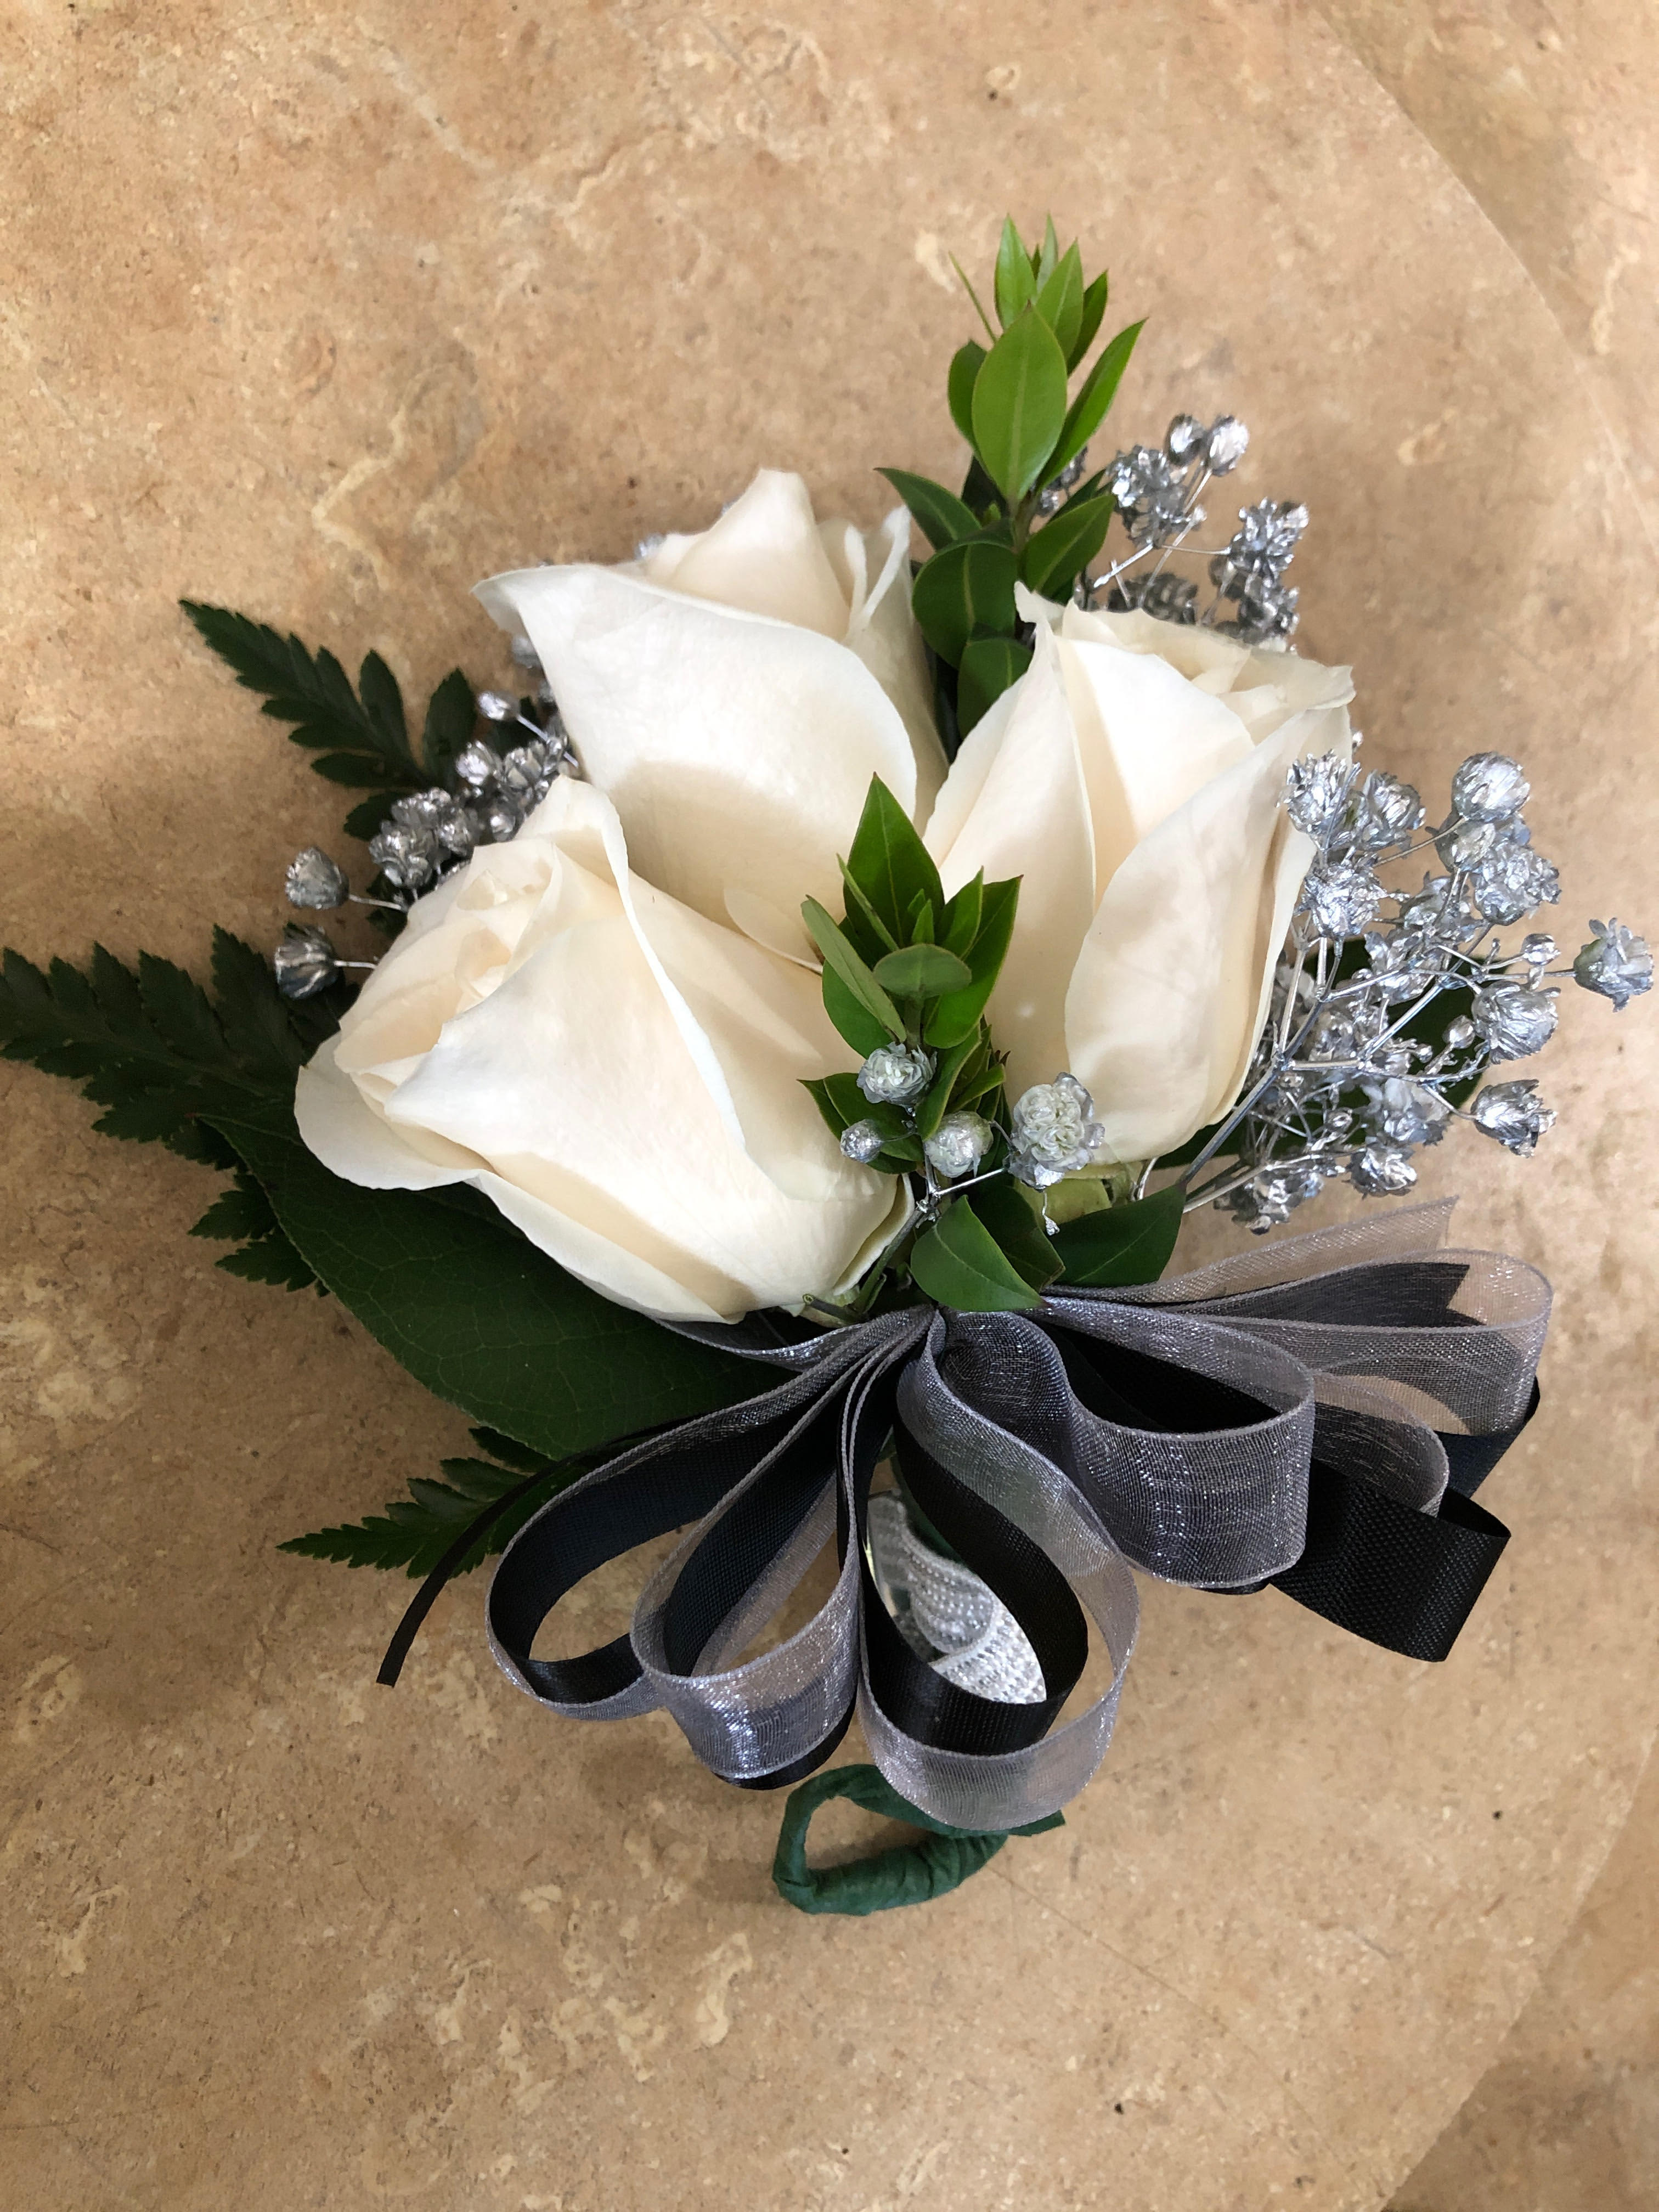 Pat Verbanning esthetisch White rose Wrist corsage in Philadelphia, PA | Logan Floral Designs and  Gifts